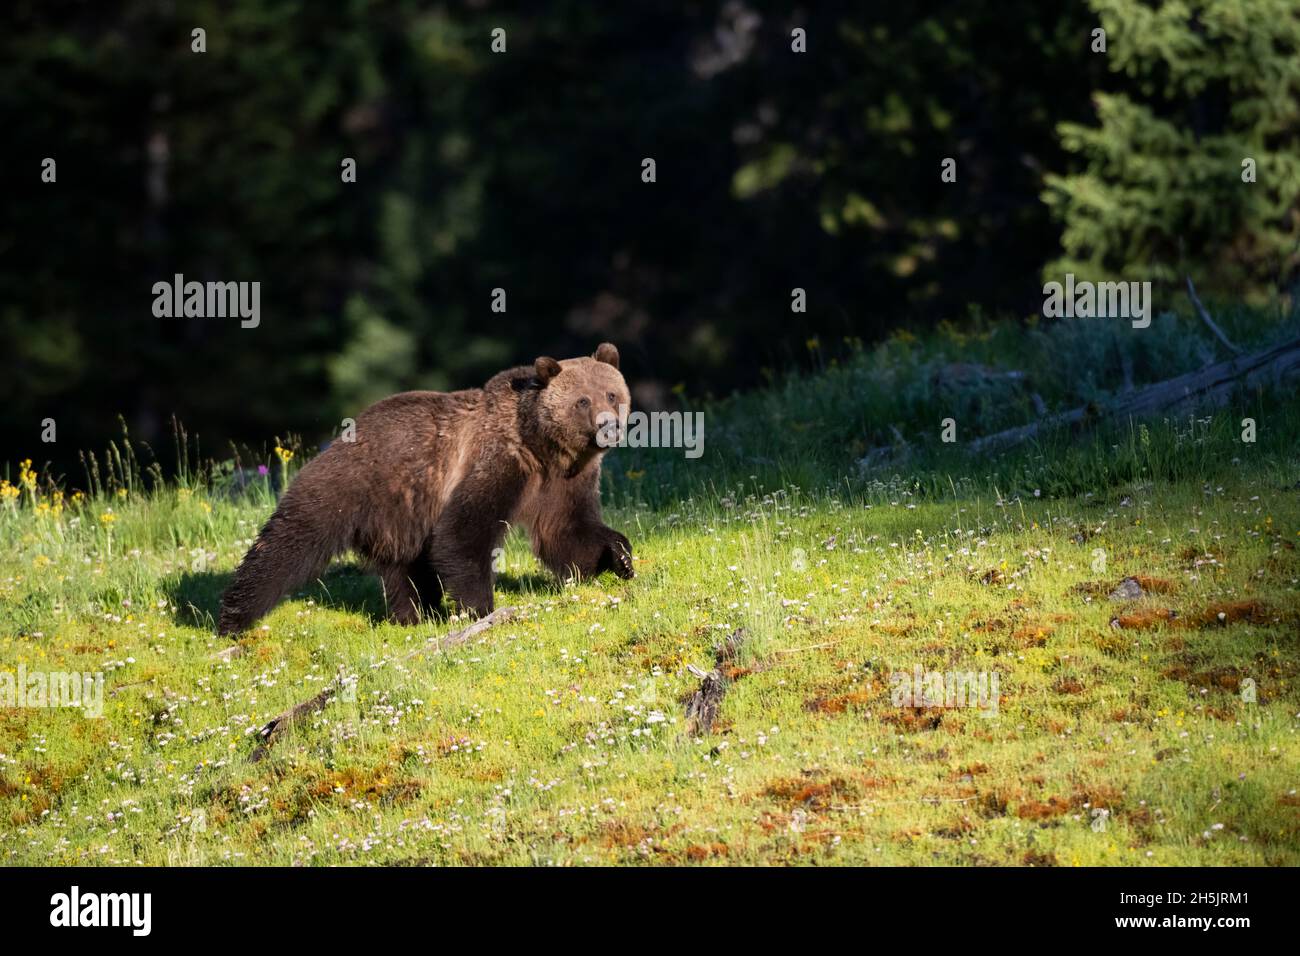 Grizzly Bear (Ursus arctos) in a flower-filled meadow just after sunrise. Yellowstone National Park, Wyoming, USA. Stock Photo